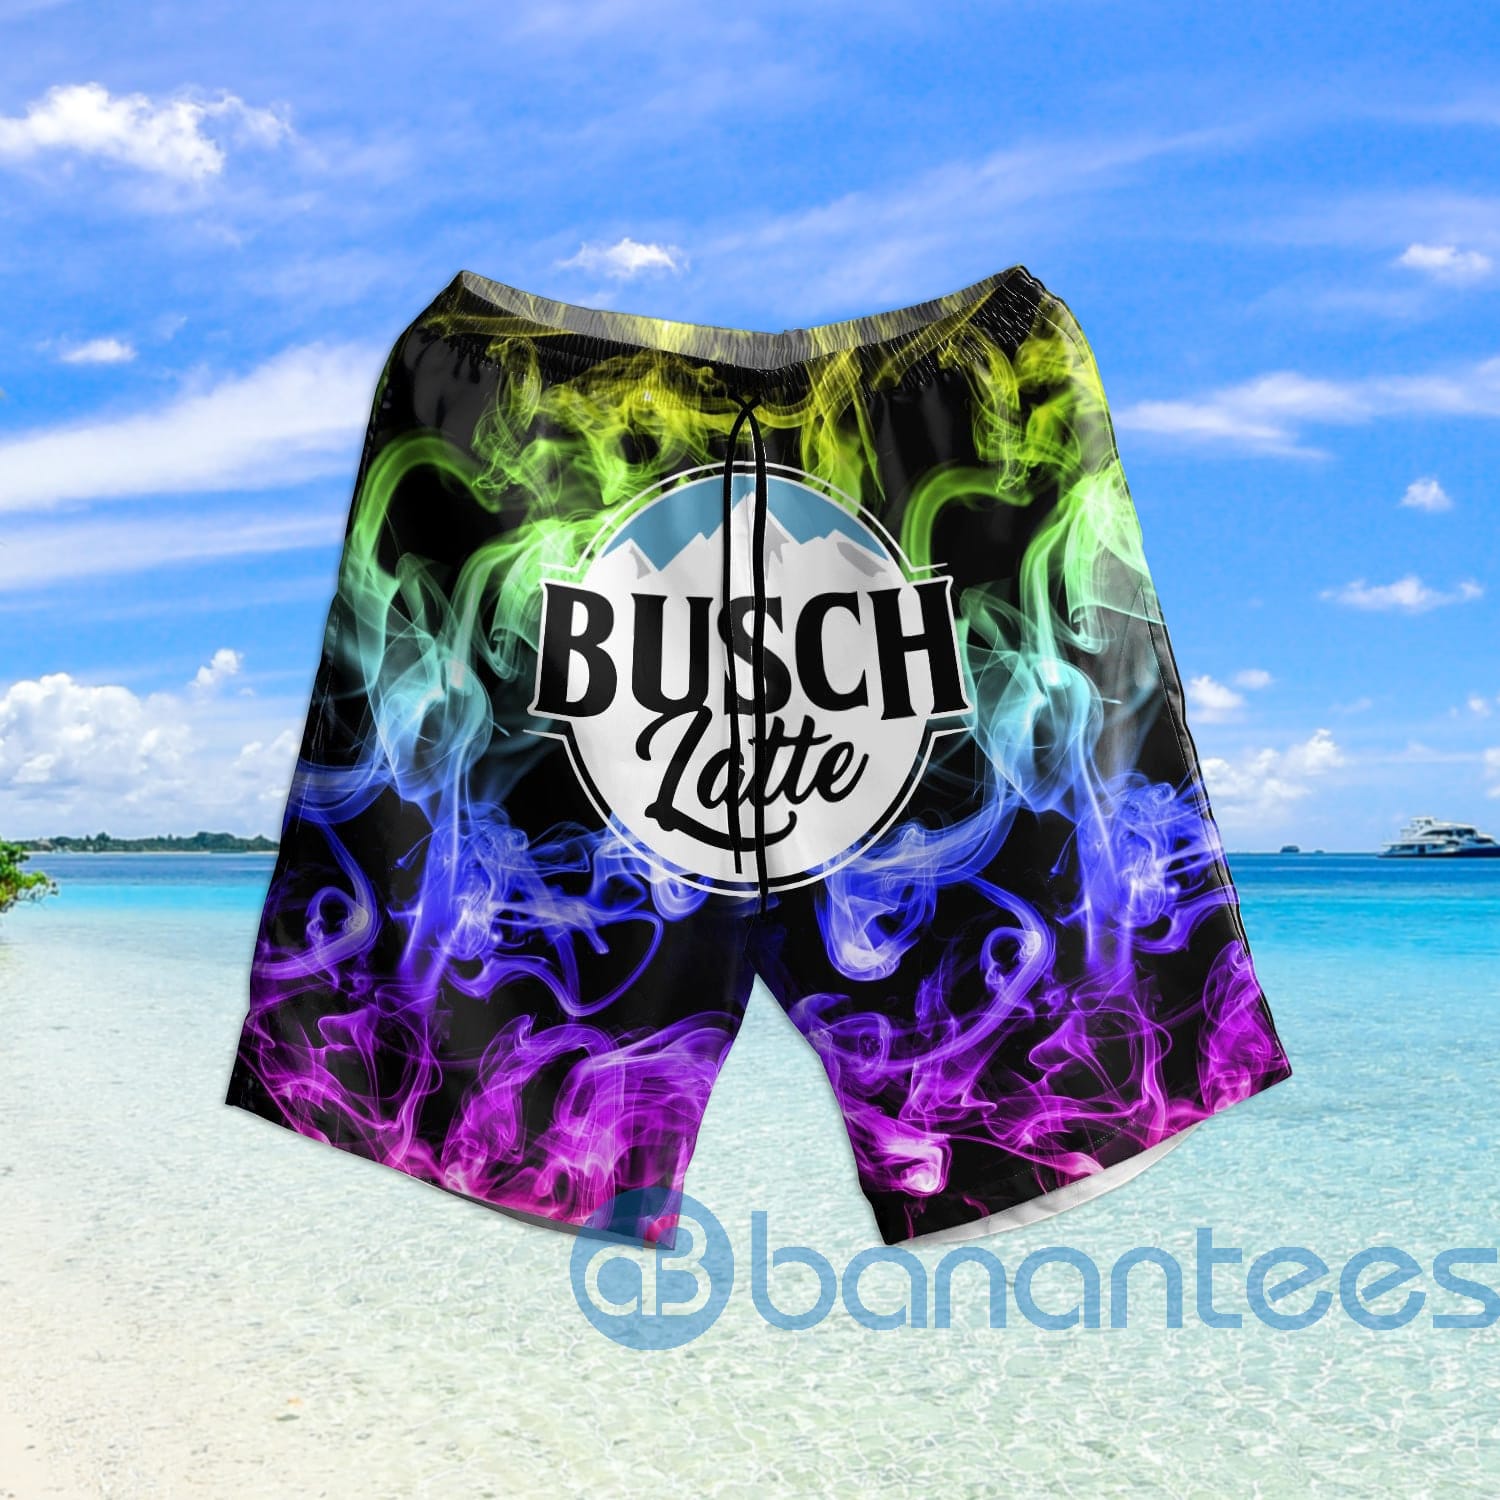 Busch Latter Smoke Beach Shorts Beer Lovers Father Day Gift